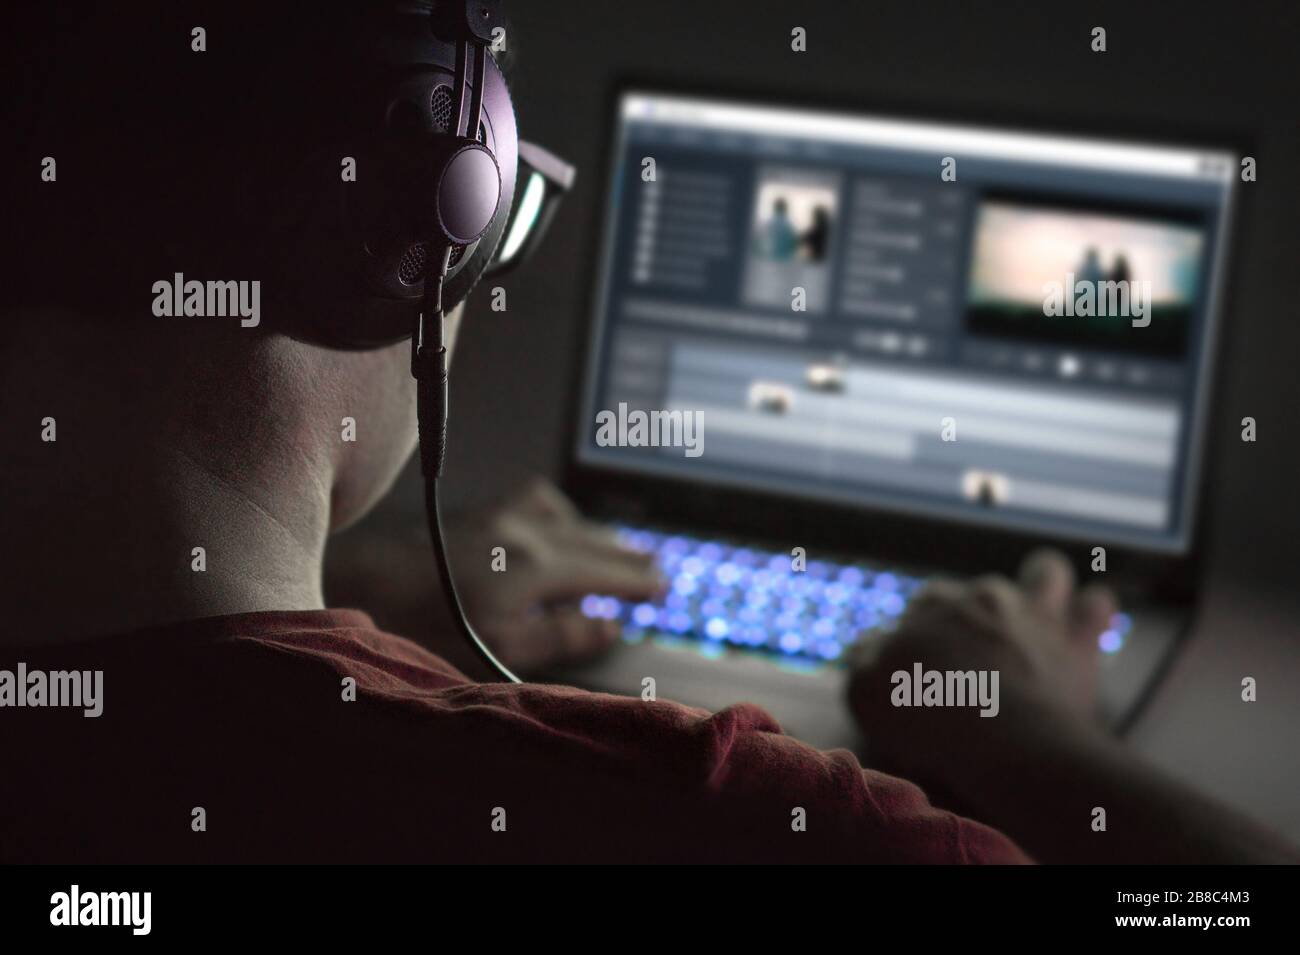 Video editing with laptop. Professional editor adding special effects or color grading footage. Back view of young man using computer software. Stock Photo